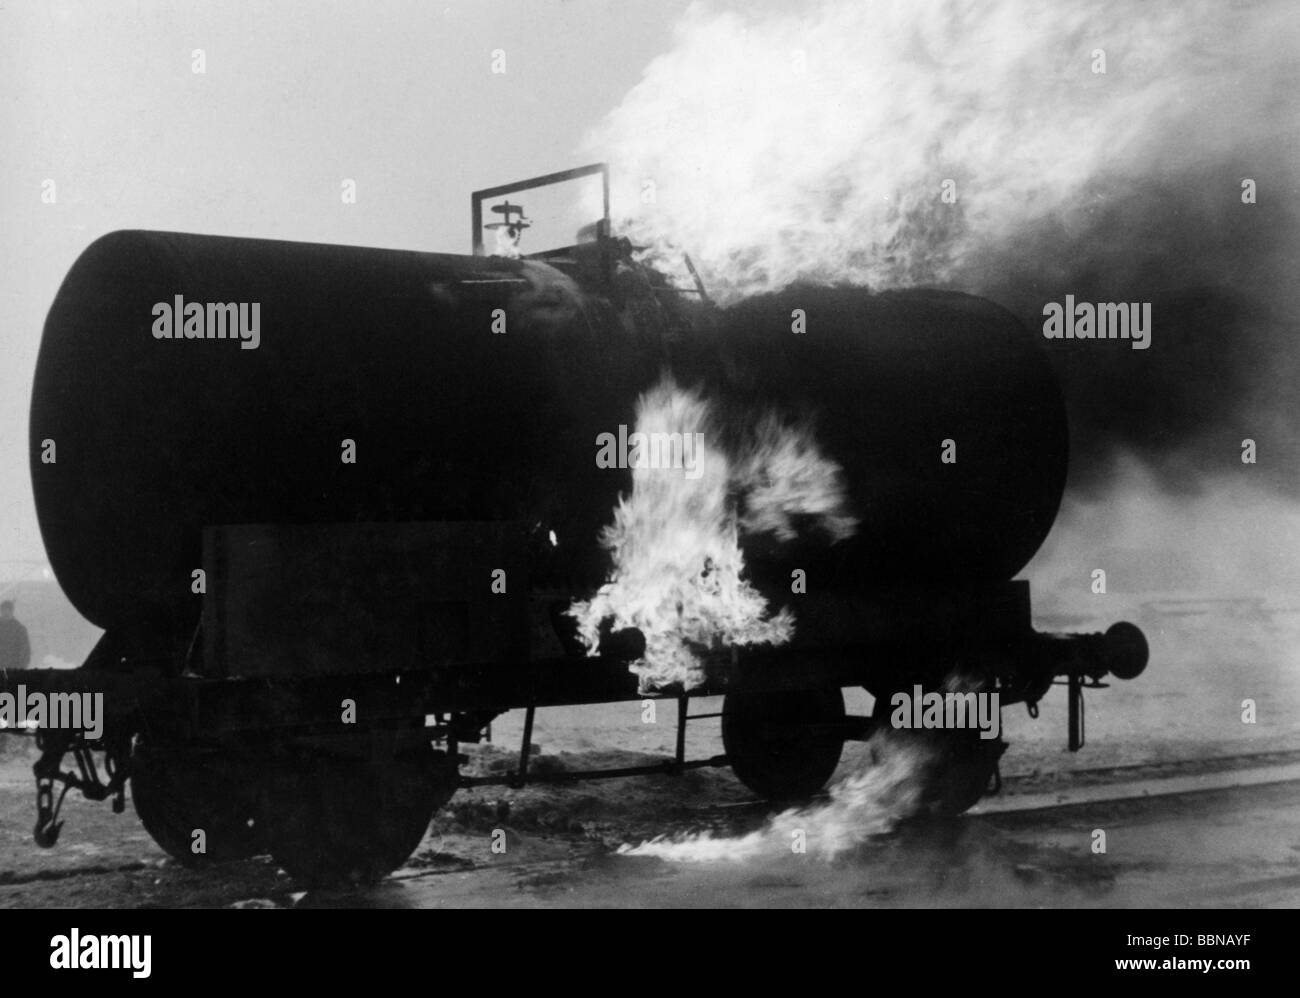 events, Second World War / WWII, Russia 1942 / 1943, burning petrol waggon at Stalino, January 1943, 20th century, historic, historical, fire, Soviet Union, USSR, tank wagon, waggons, wagons, railway, train, Third Reich, Donets Basin, people, 1940s, Stock Photo